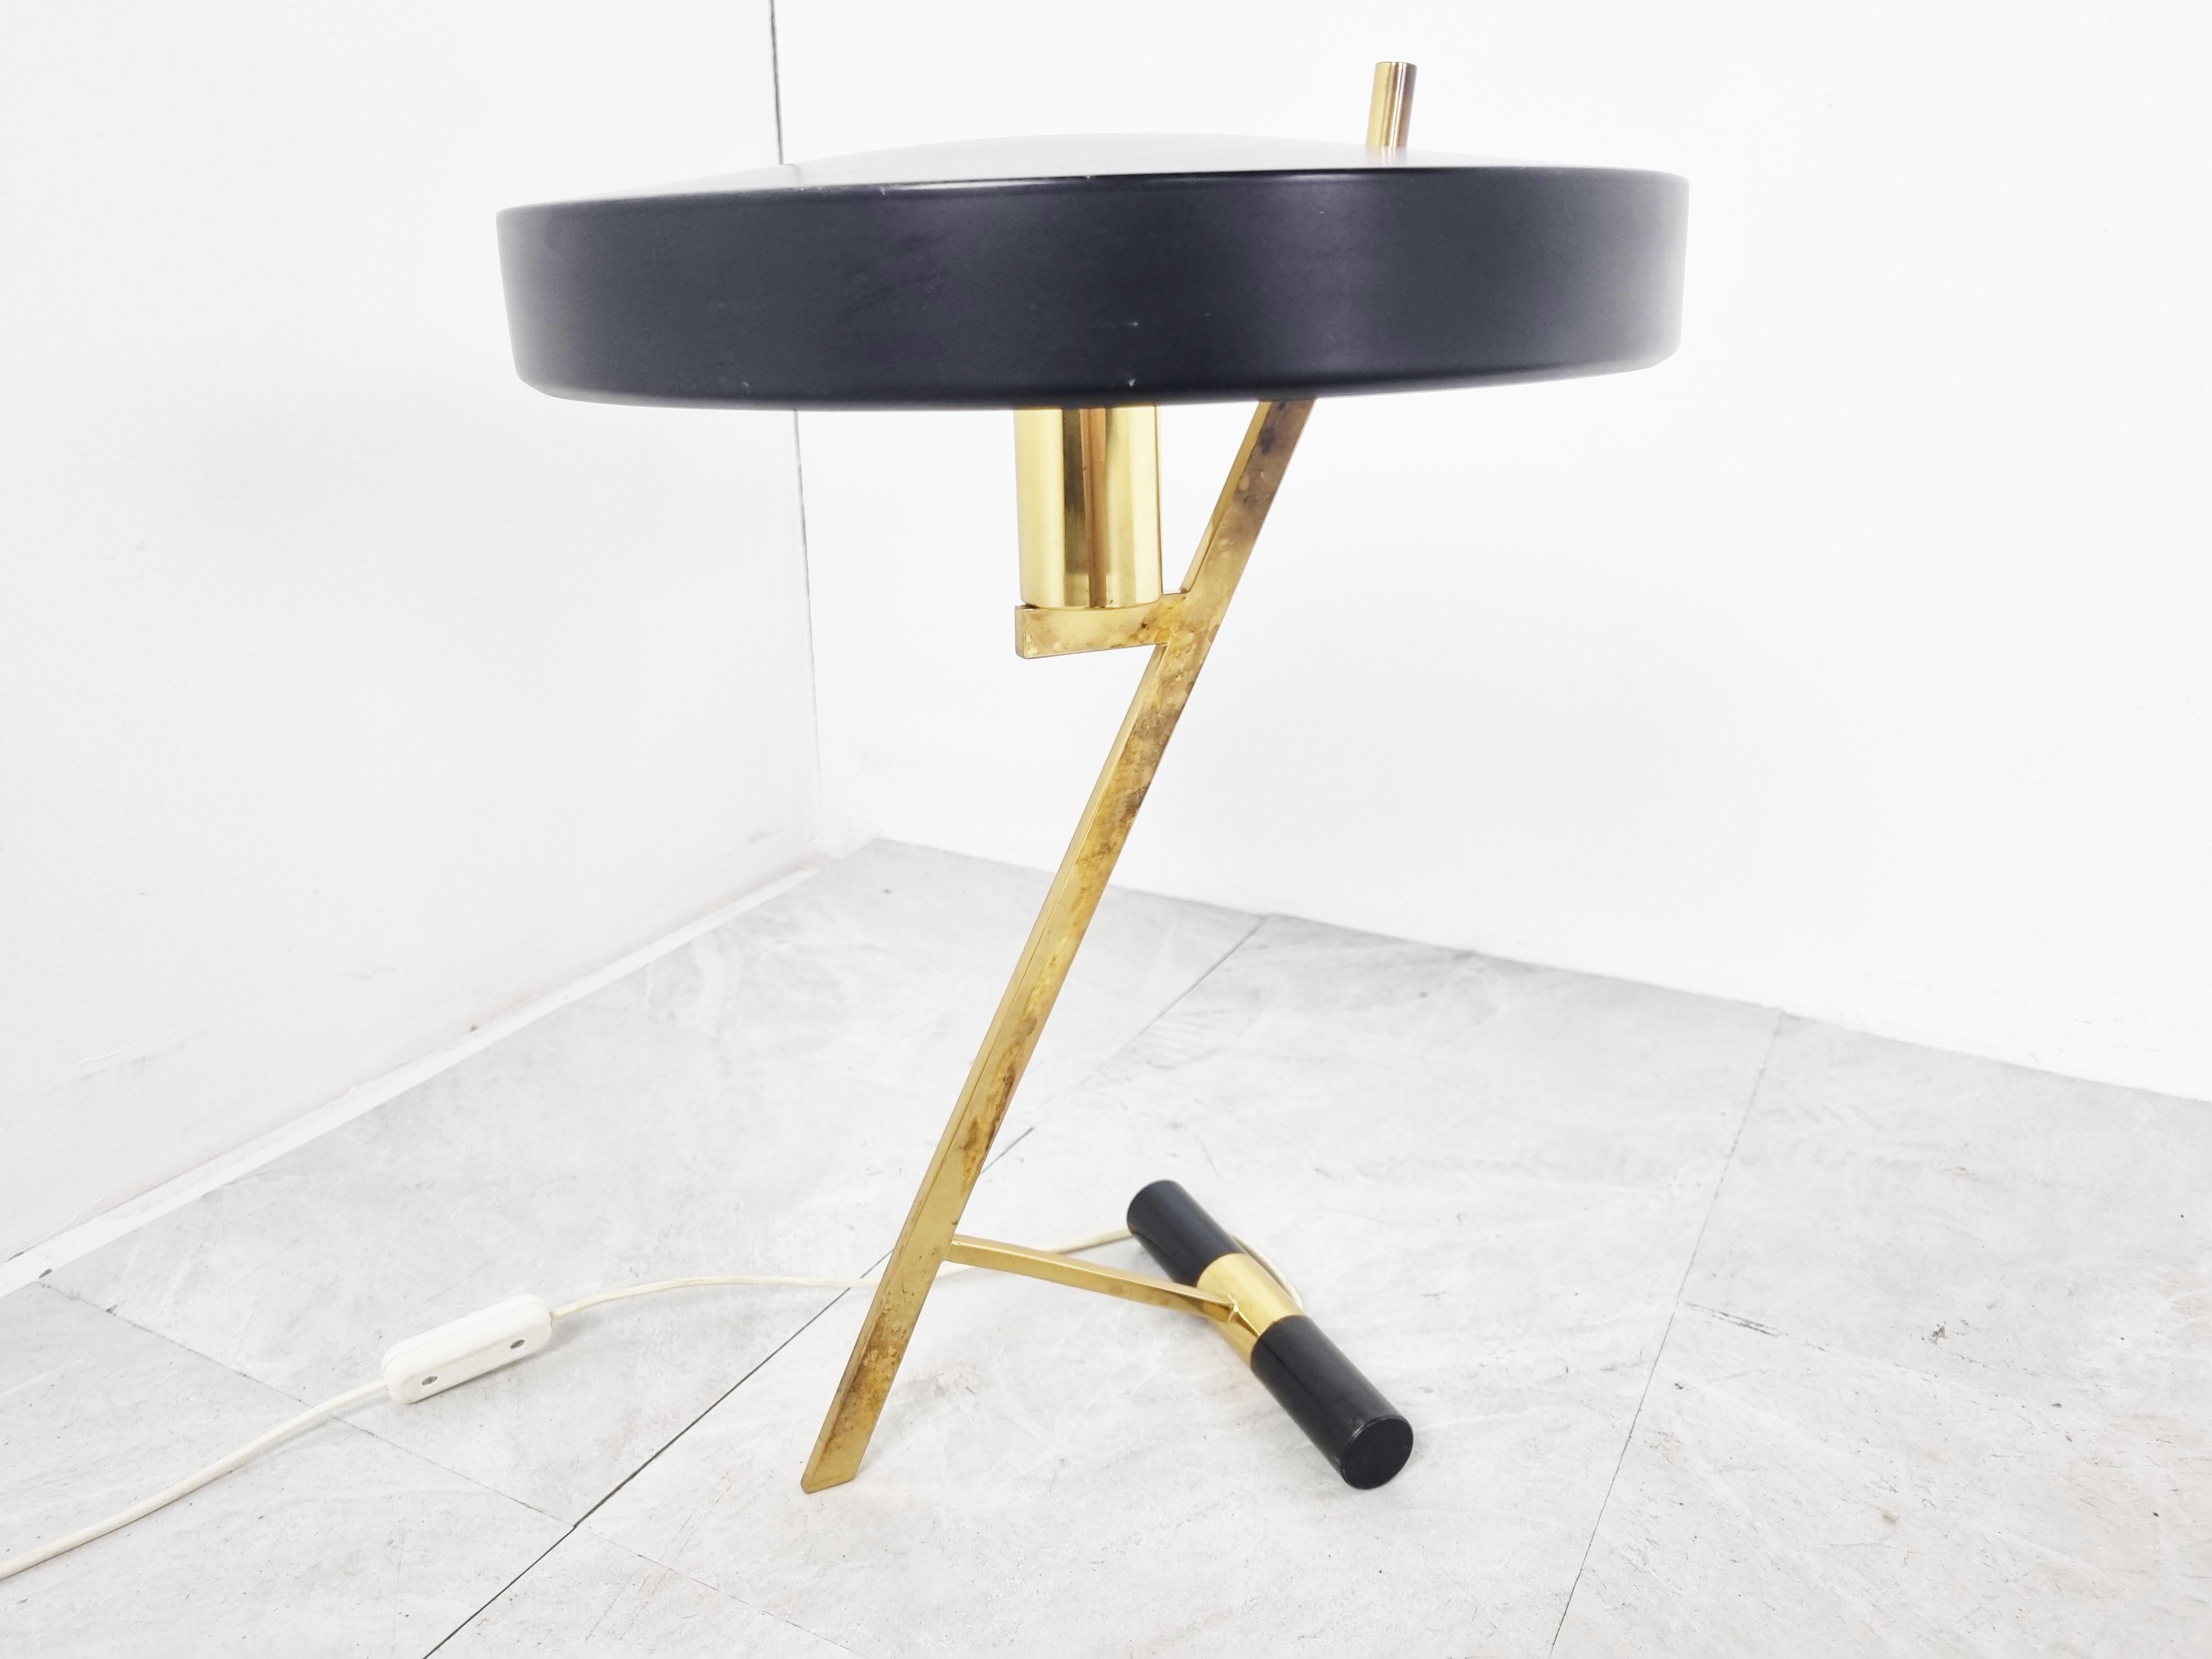 Z model or 'diplomat' table lamp designed by Louis Kalff for Philips.

This model is one of Louis Kalff's best designs.

It features a brass Z shaped base with a single light point.

The shade is made of enamelled aluminum.

Manufactured by